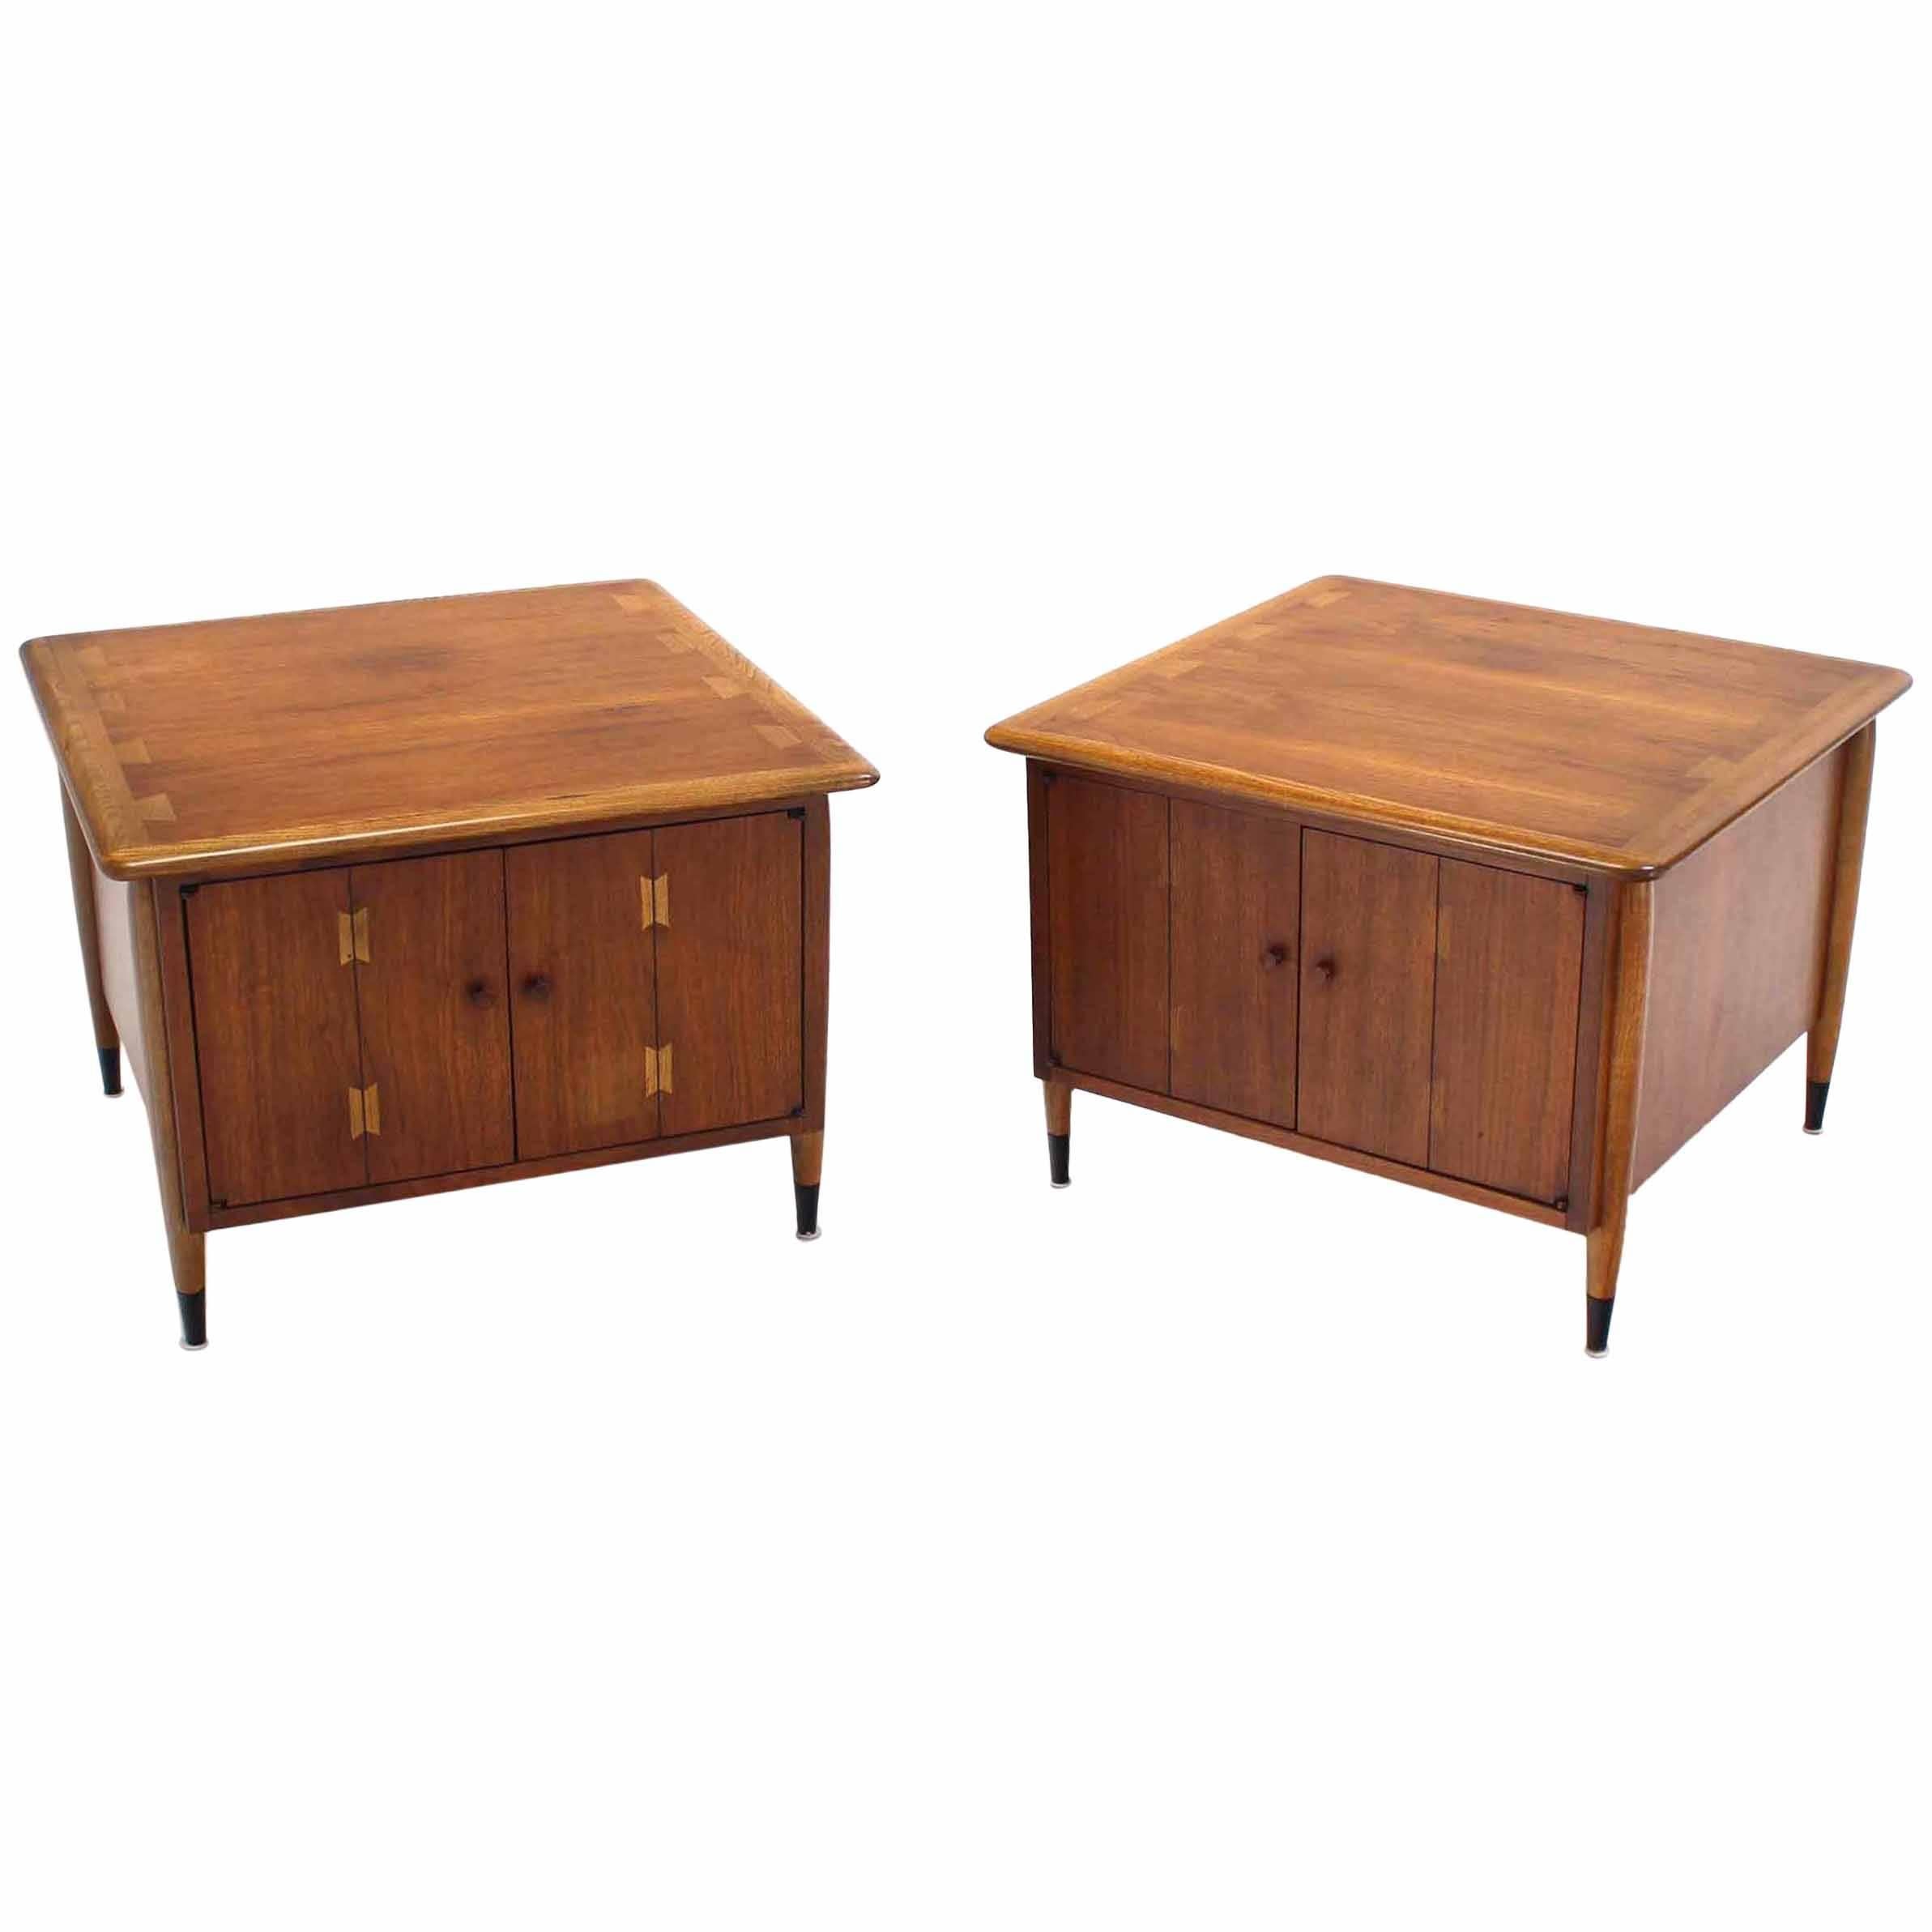 Pair of Walnut End Tables Dovetail Top Designs